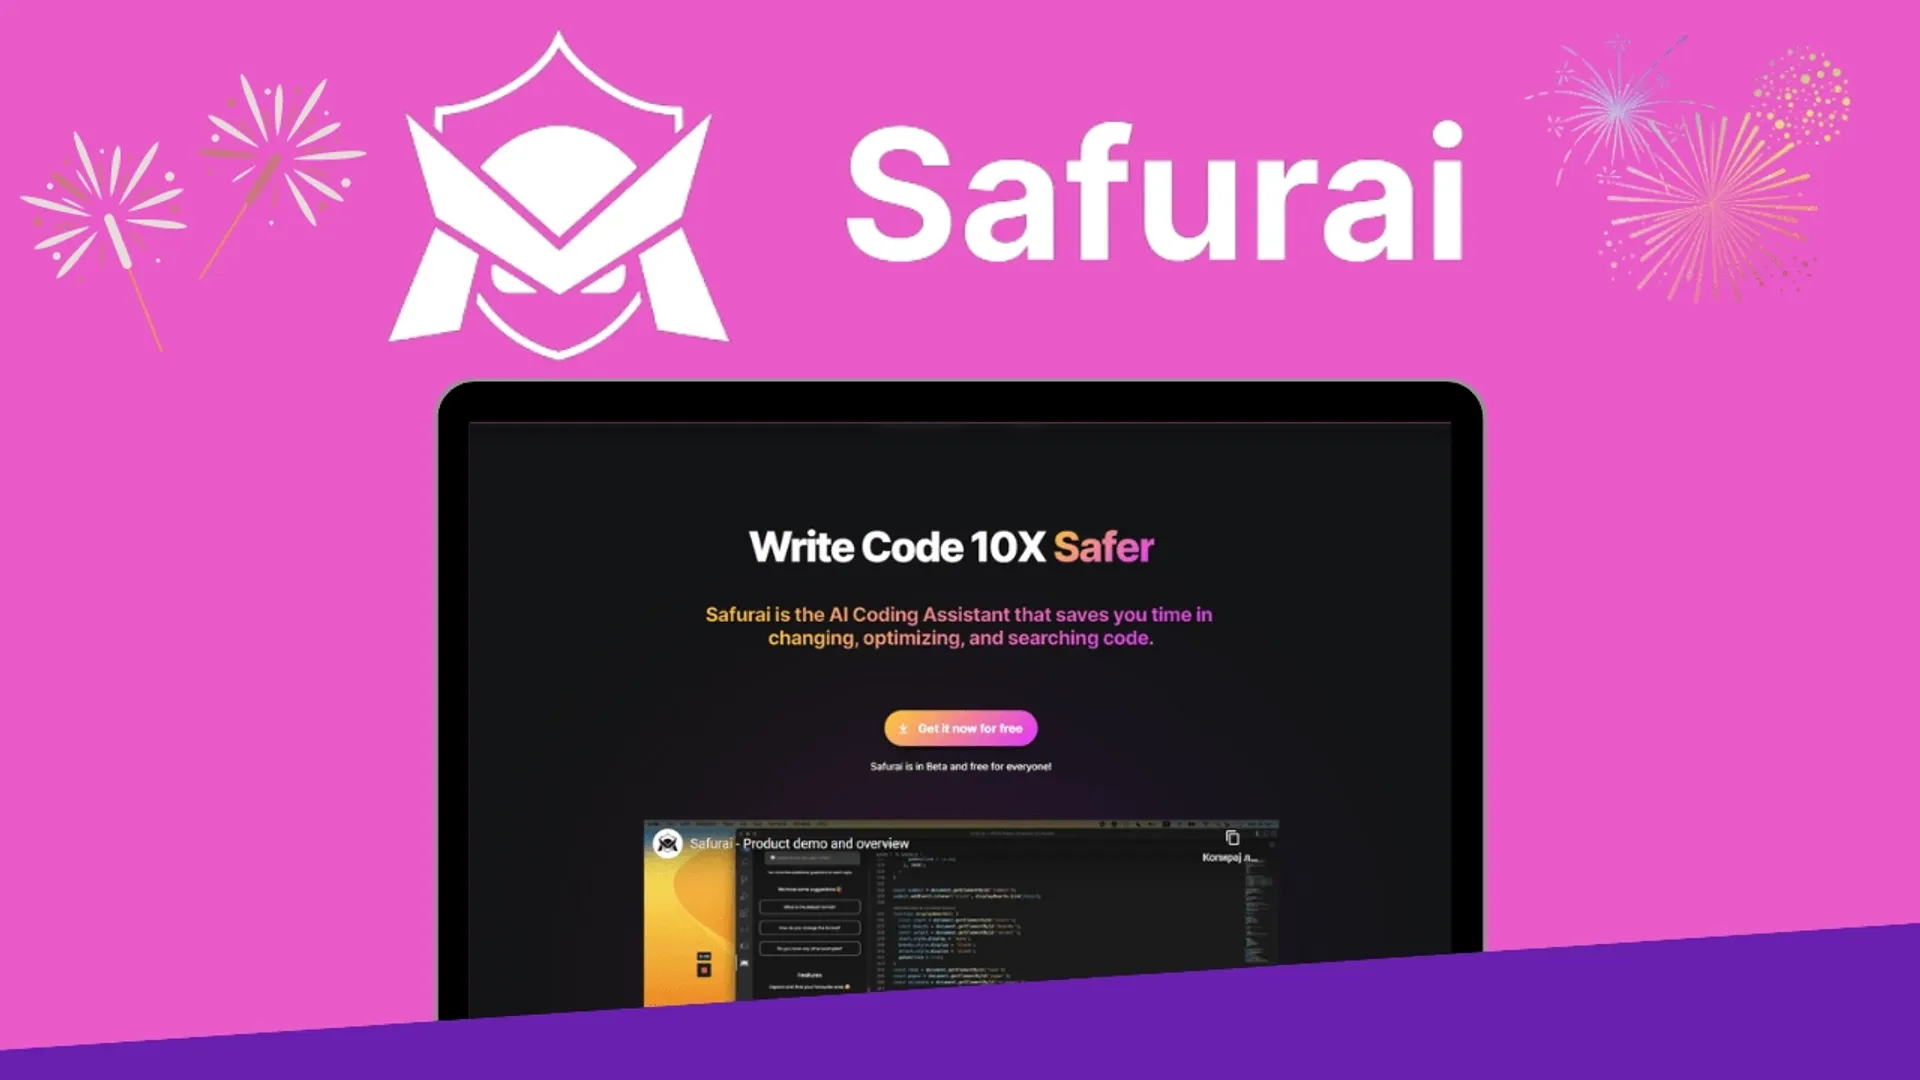 🚨 New tool review live on our website! 🚨

If you're a software developer looking for an efficient and trustworthy AI code assistant, look no further than Safurai! Here are some of the benefits of using this tool:

✅ Time-saving: Quickly find solutions to coding issues and focus on the important aspects of your work.
✅ Increased productivity: Improve code quality and productivity for faster project completion and higher success rates.
✅ Reduced errors: Fewer bugs and faster debugging process.

However, it's important to consider the drawbacks too:

❌ Dependency: Relying too heavily on Safurai can be frustrating if it doesn't work. Always have a backup plan.
❌ Cost: While some features are free, smaller teams or individuals may find the cost of paid features prohibitive.

Overall, Safurai is an excellent AI code assistant developed by experienced programmers to enhance your coding experience. Give it a try and see the difference it can make! 

Read the full review 👉 https://webthat.io/safurai/